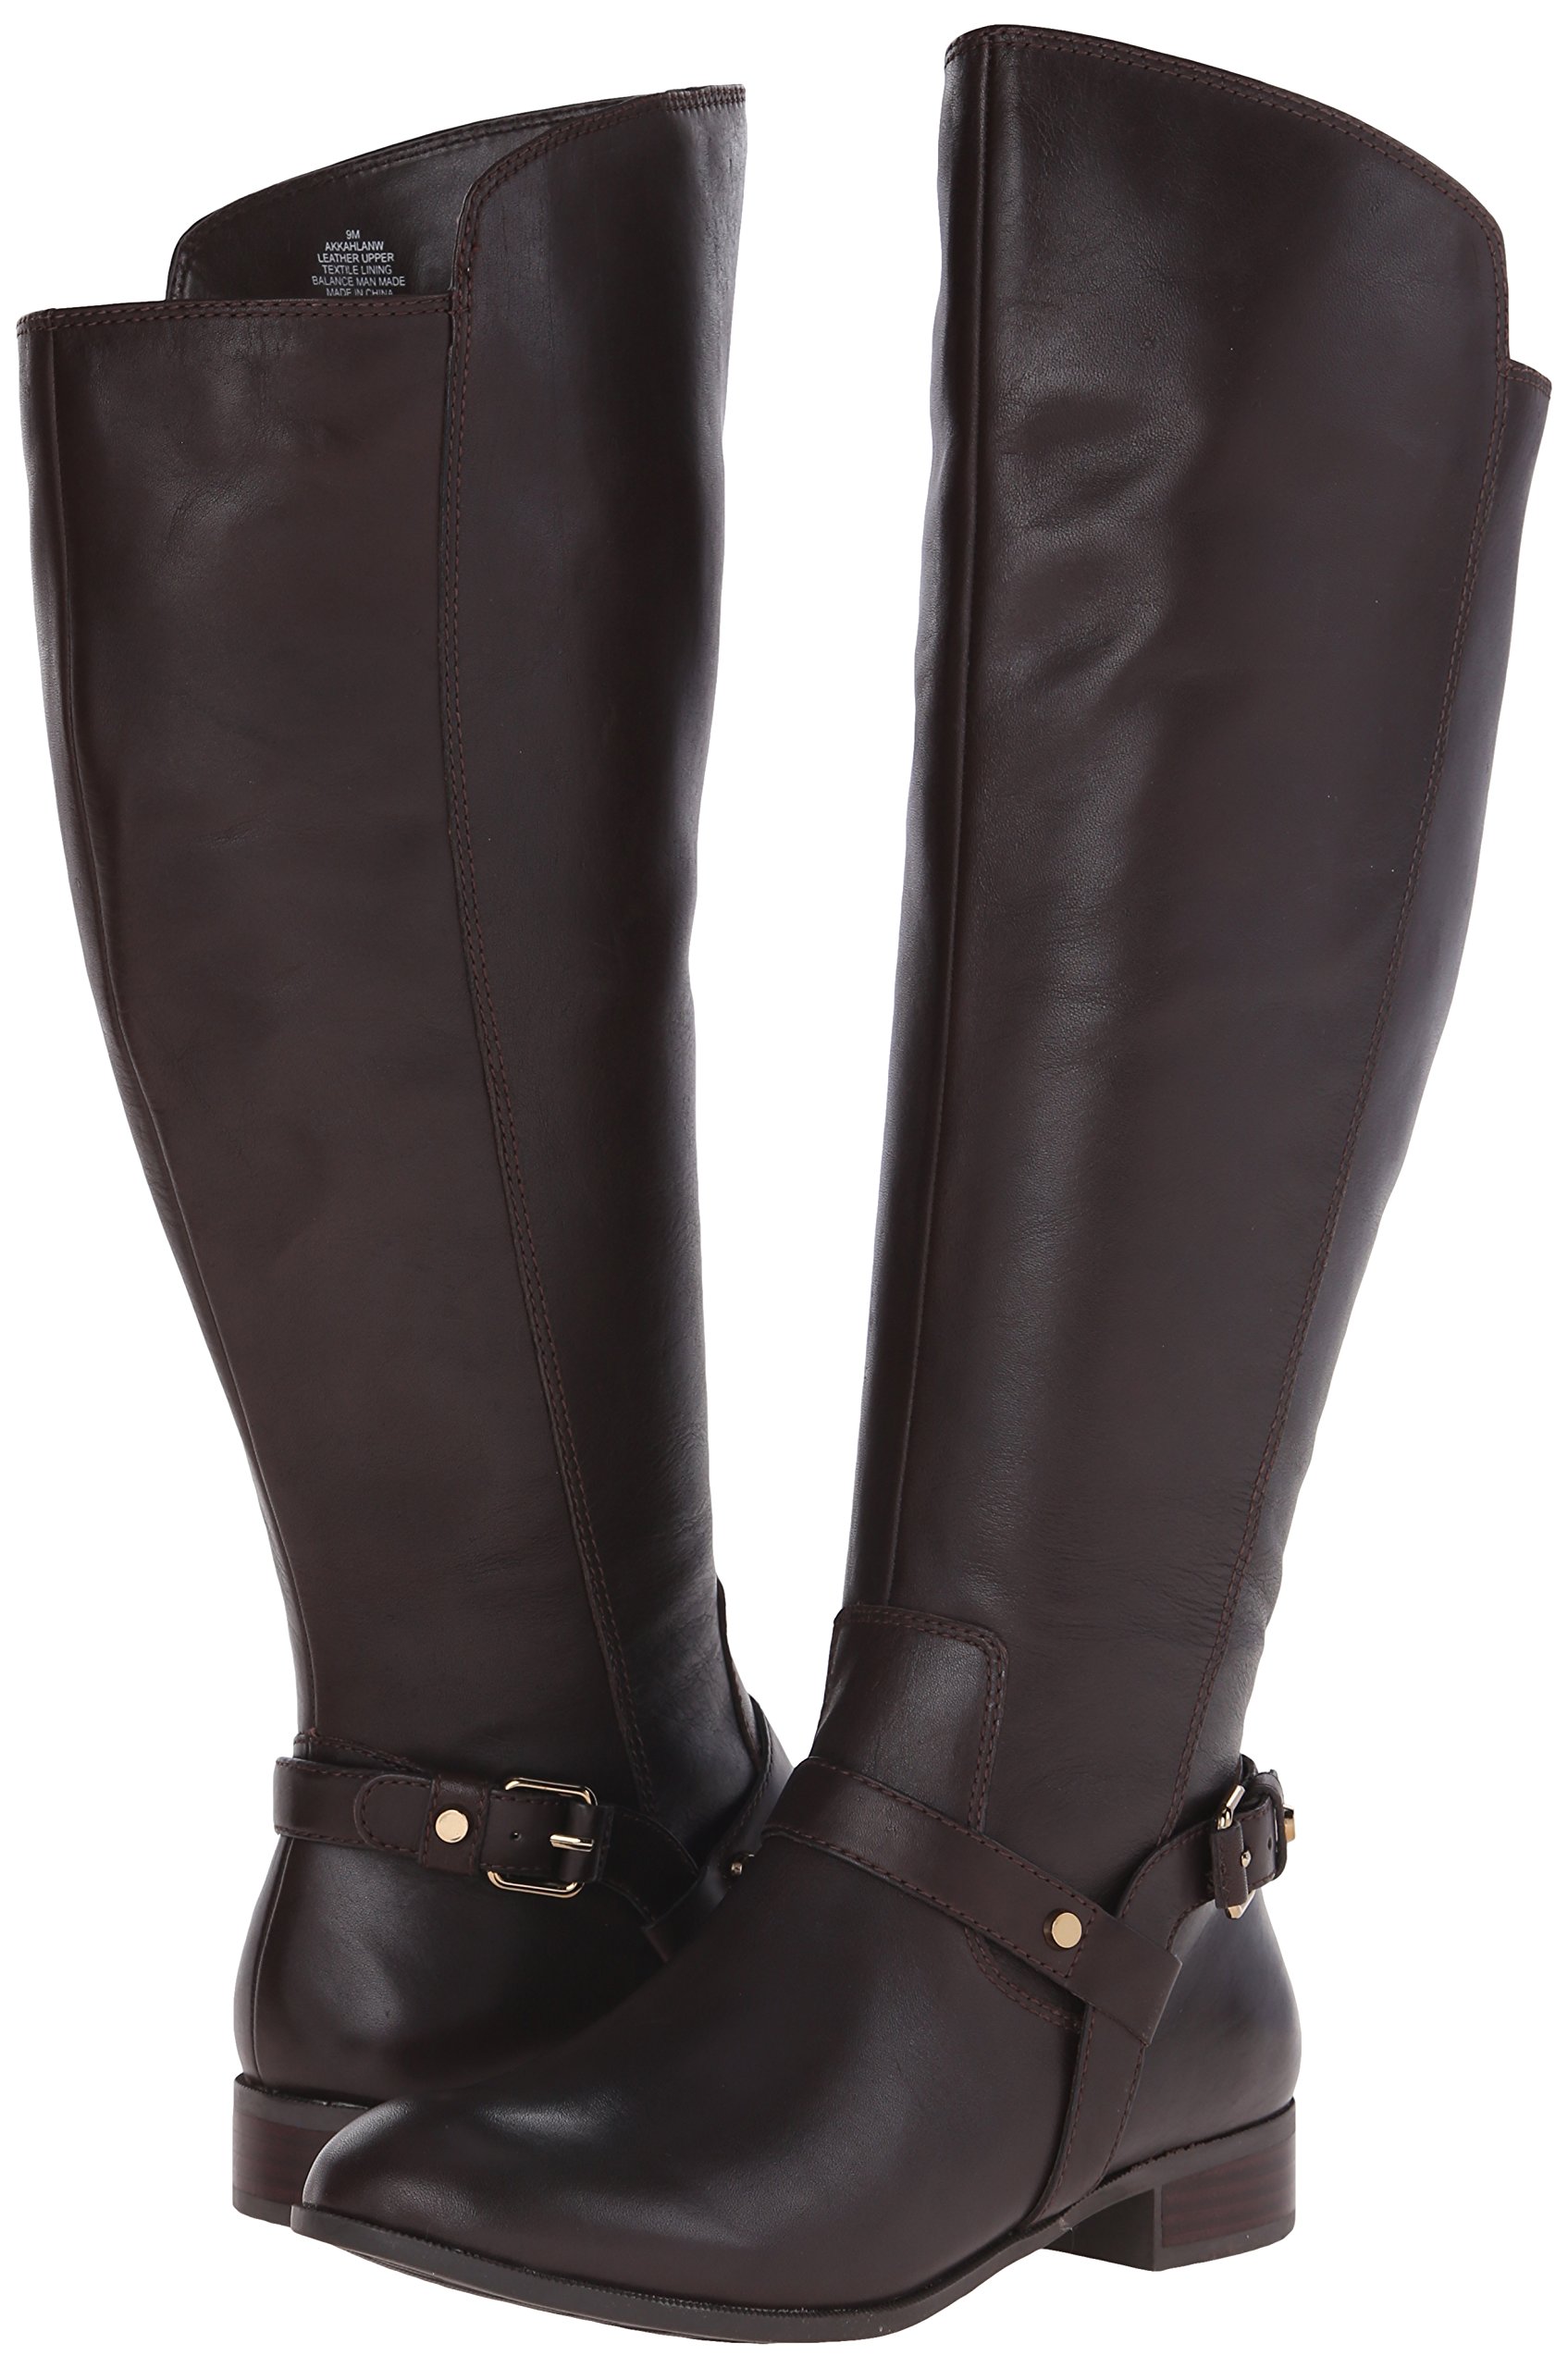 Anne Klein Women's Kahlan Wide Calf Leather Riding Boot